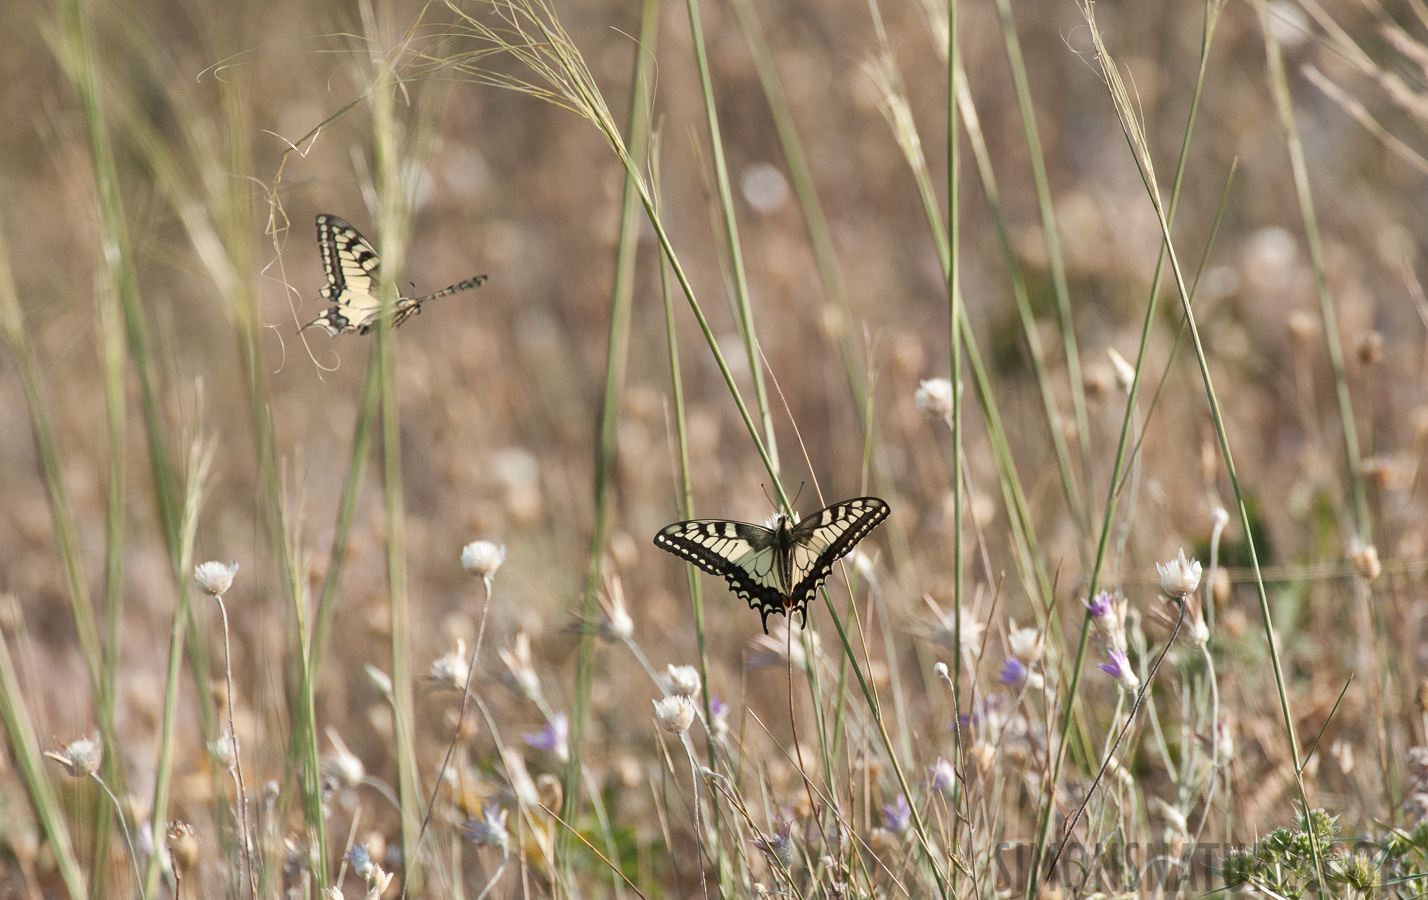 Papilio machaon machaon [550 mm, 1/2500 sec at f / 8.0, ISO 1600]